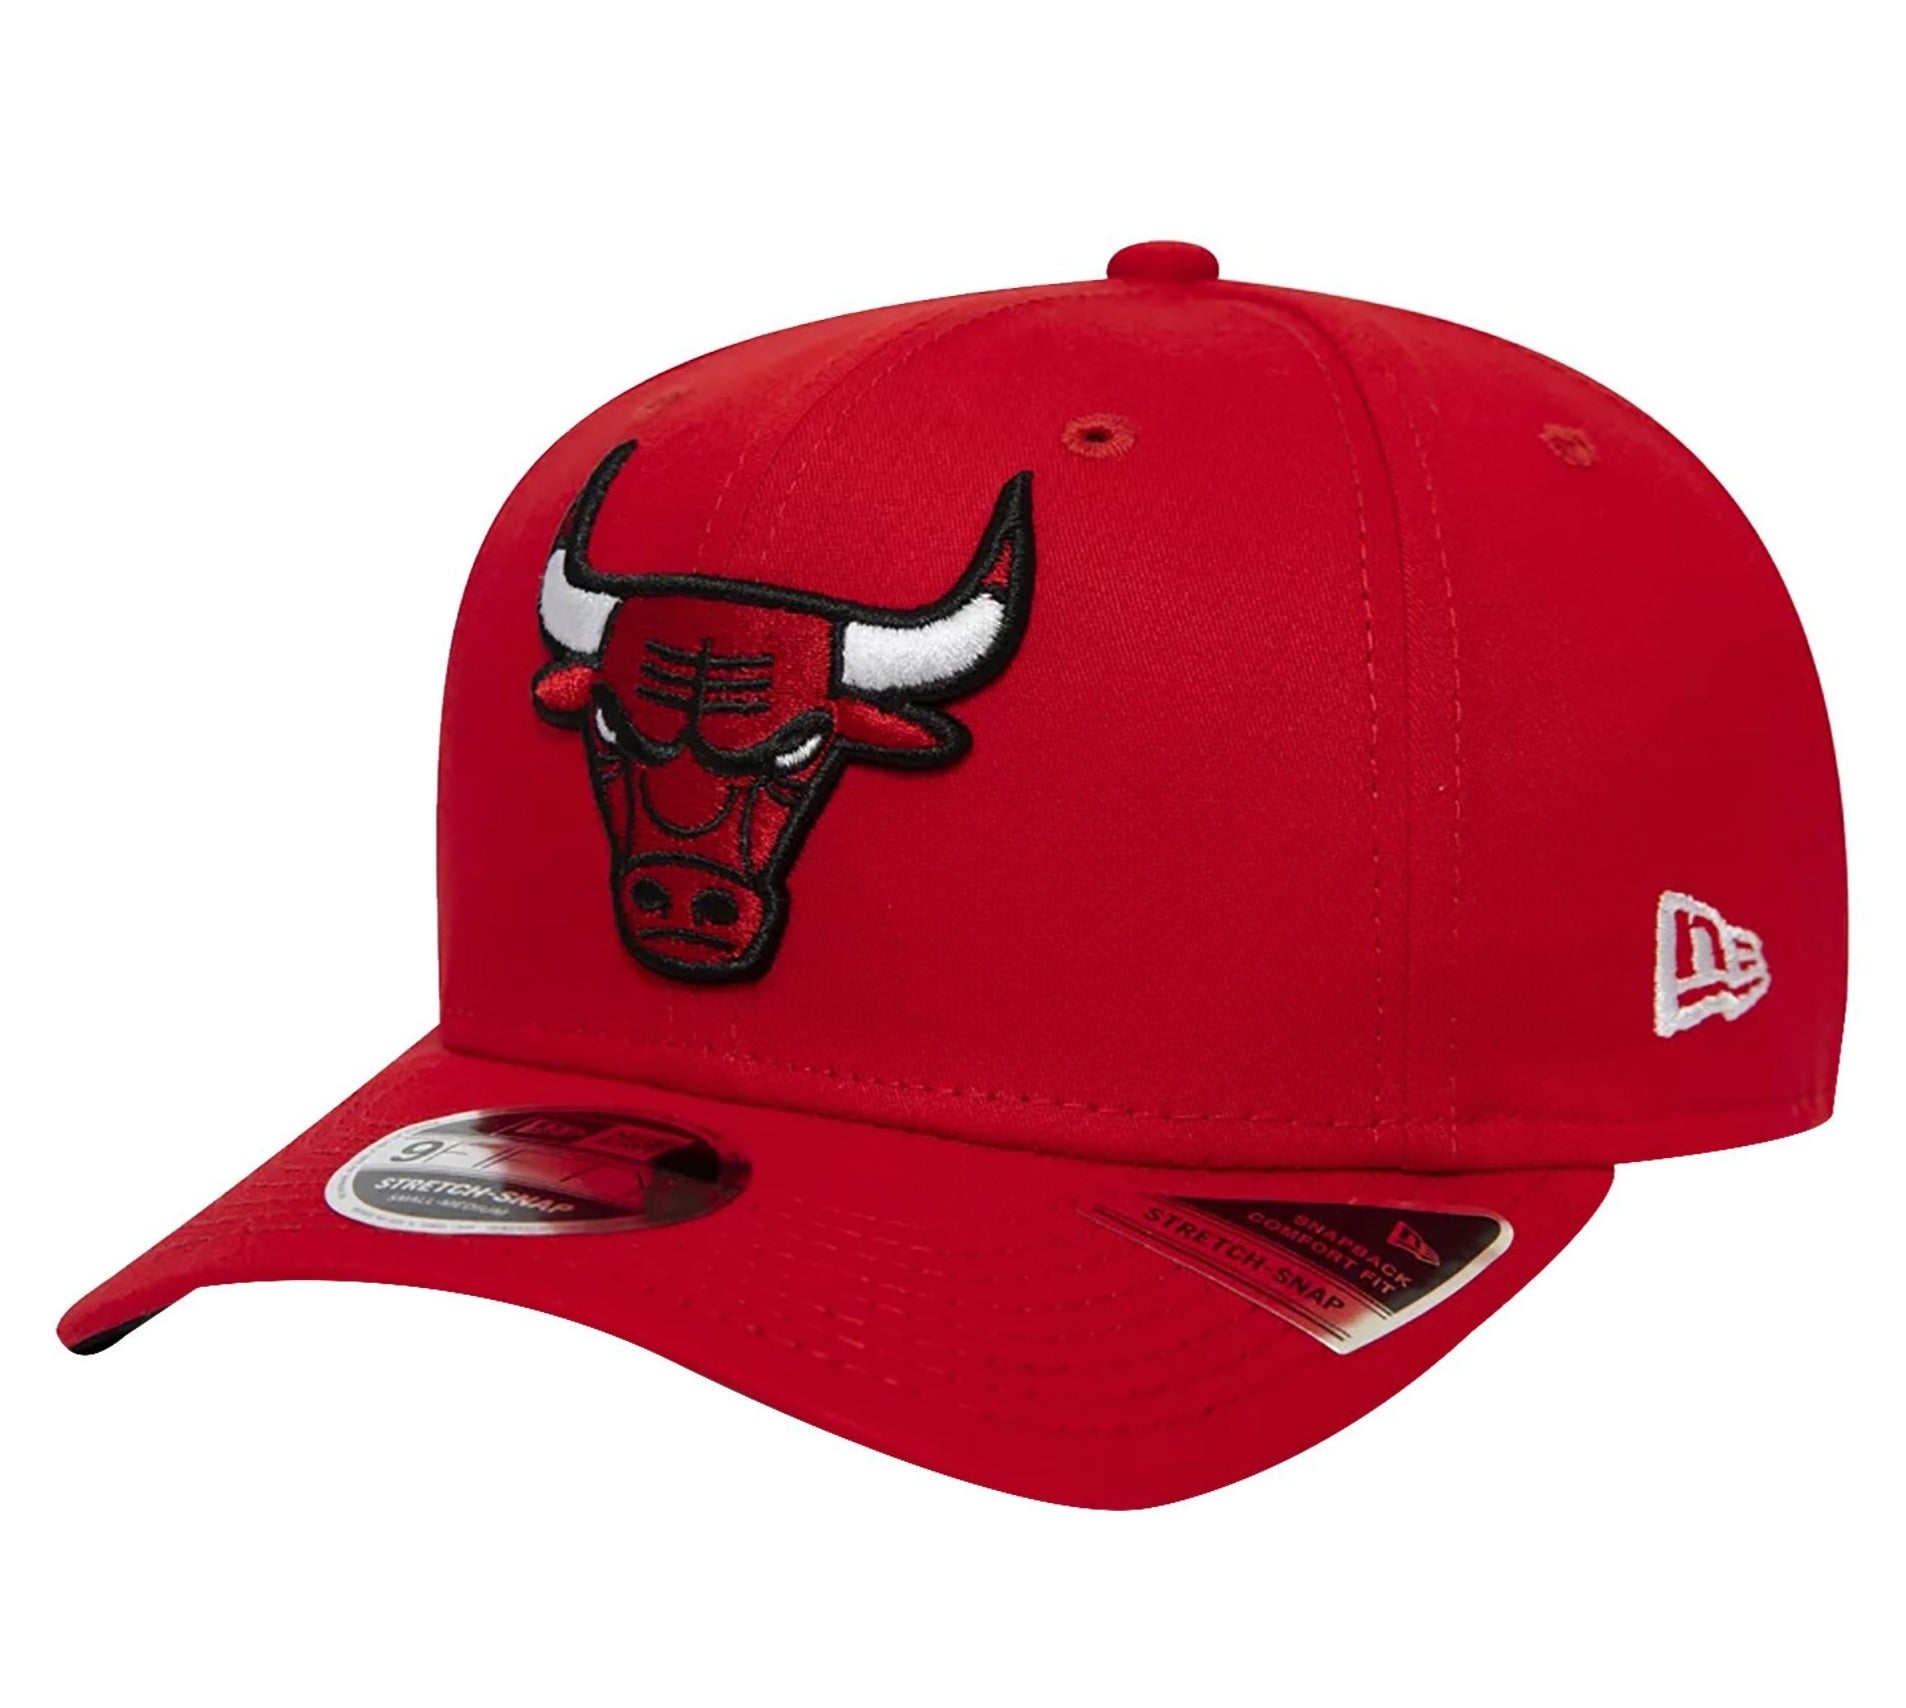 NEW CHICAGO BULLS SNAP 9FIFTY – Rider lab